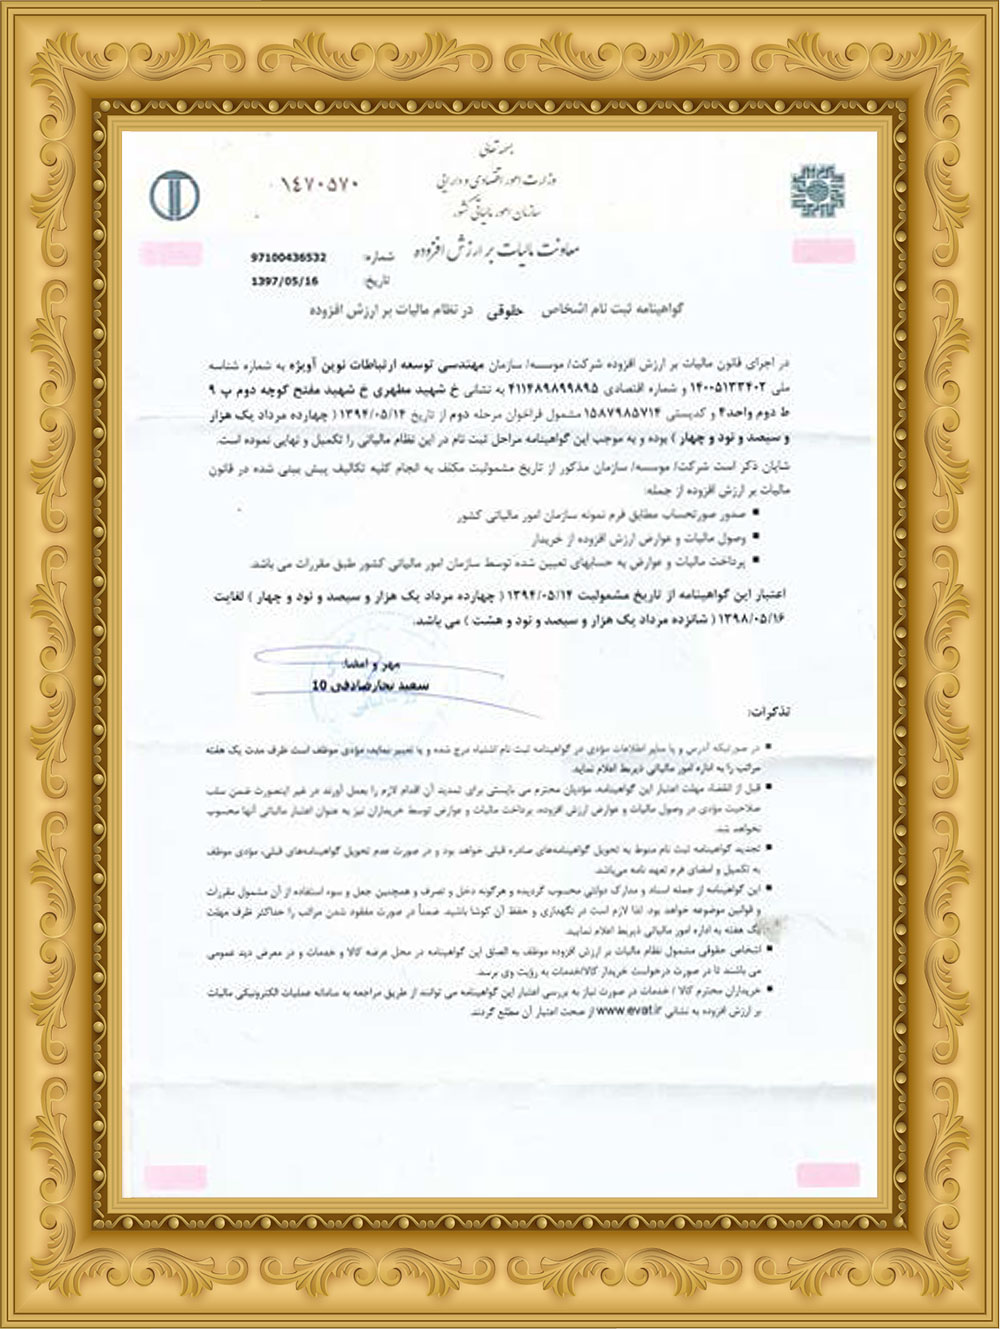 Value added certificate